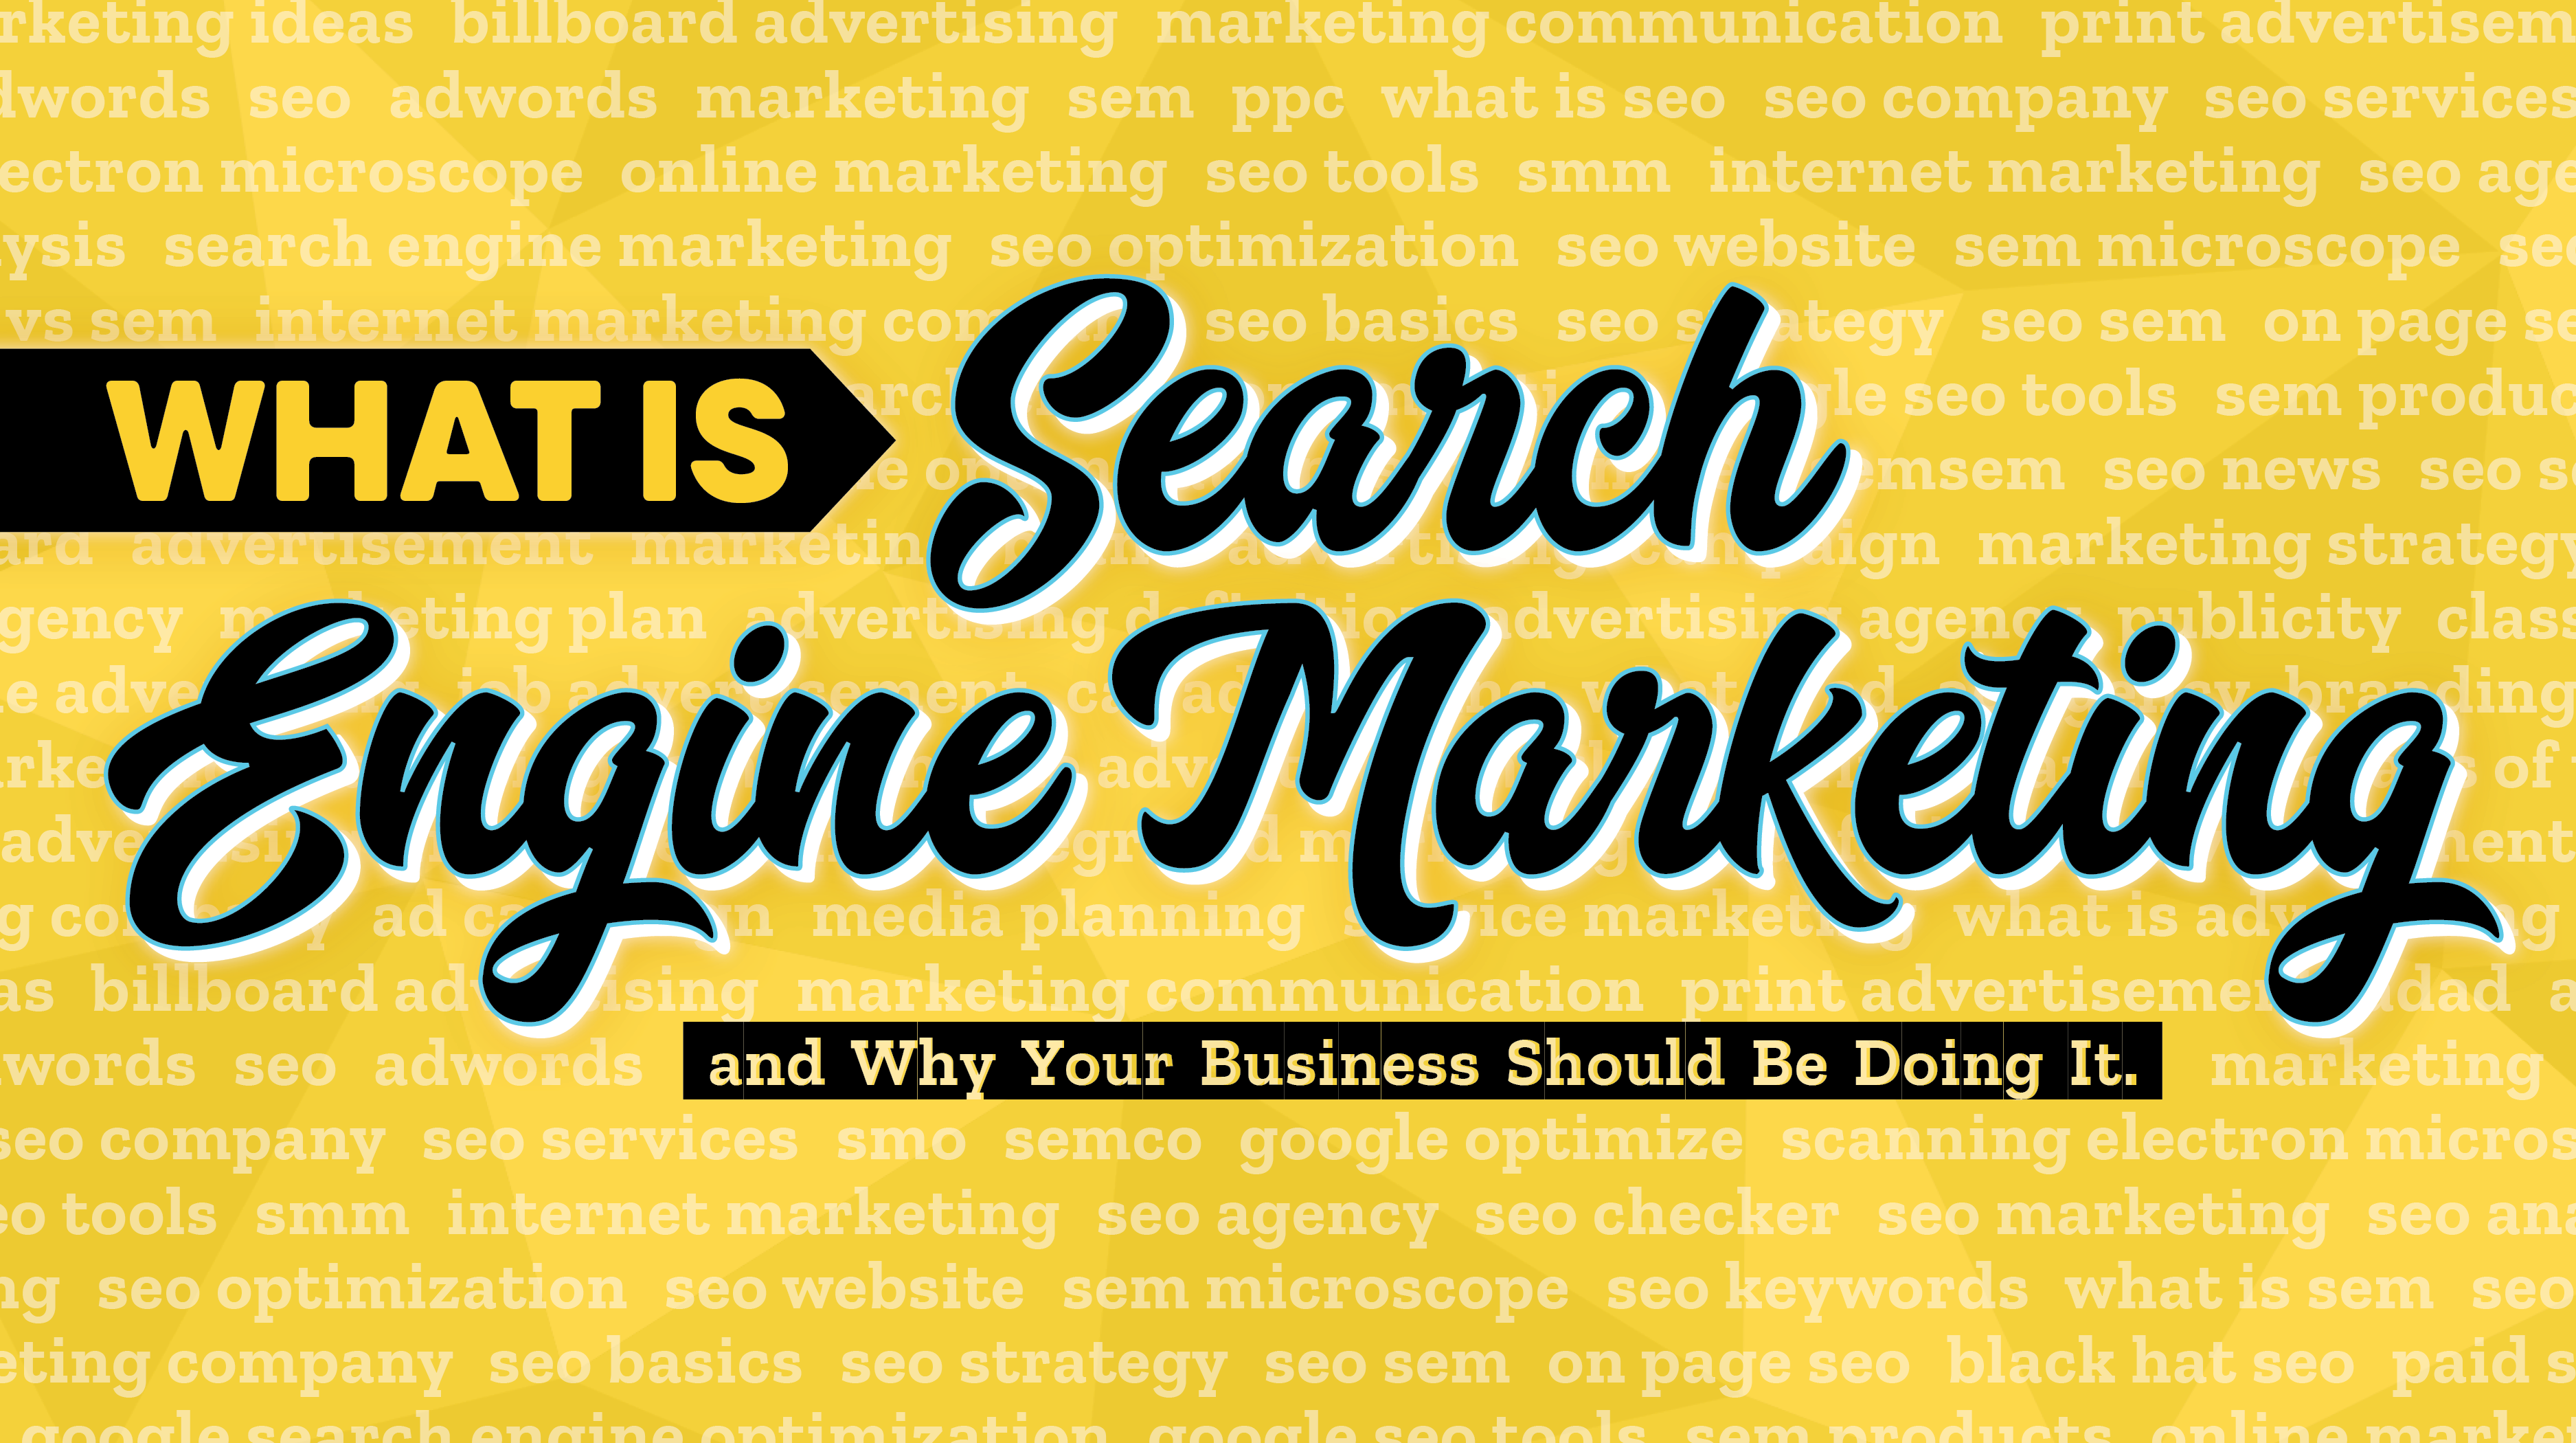 Search Engine Marketing and Why Your Business Should Be Doing It